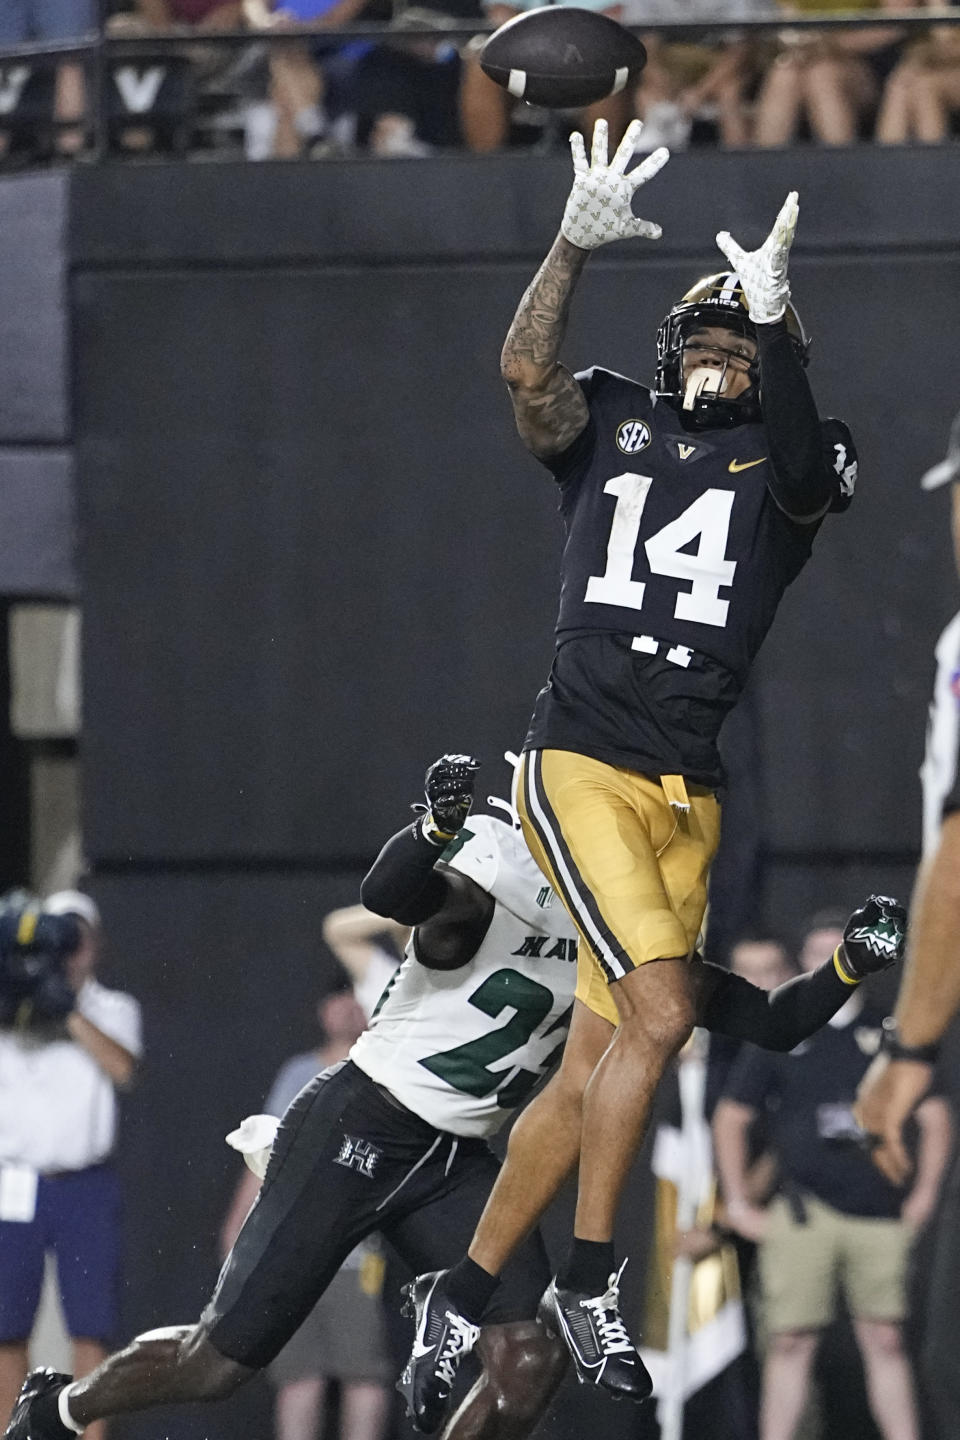 Vanderbilt wide receiver Will Sheppard (14) makes a touchdown catch over Hawaii defensive back Virdel Edwards II during the second half of an NCAA college football game Saturday, Aug. 26, 2023, in Nashville, Tenn. (AP Photo/George Walker IV)